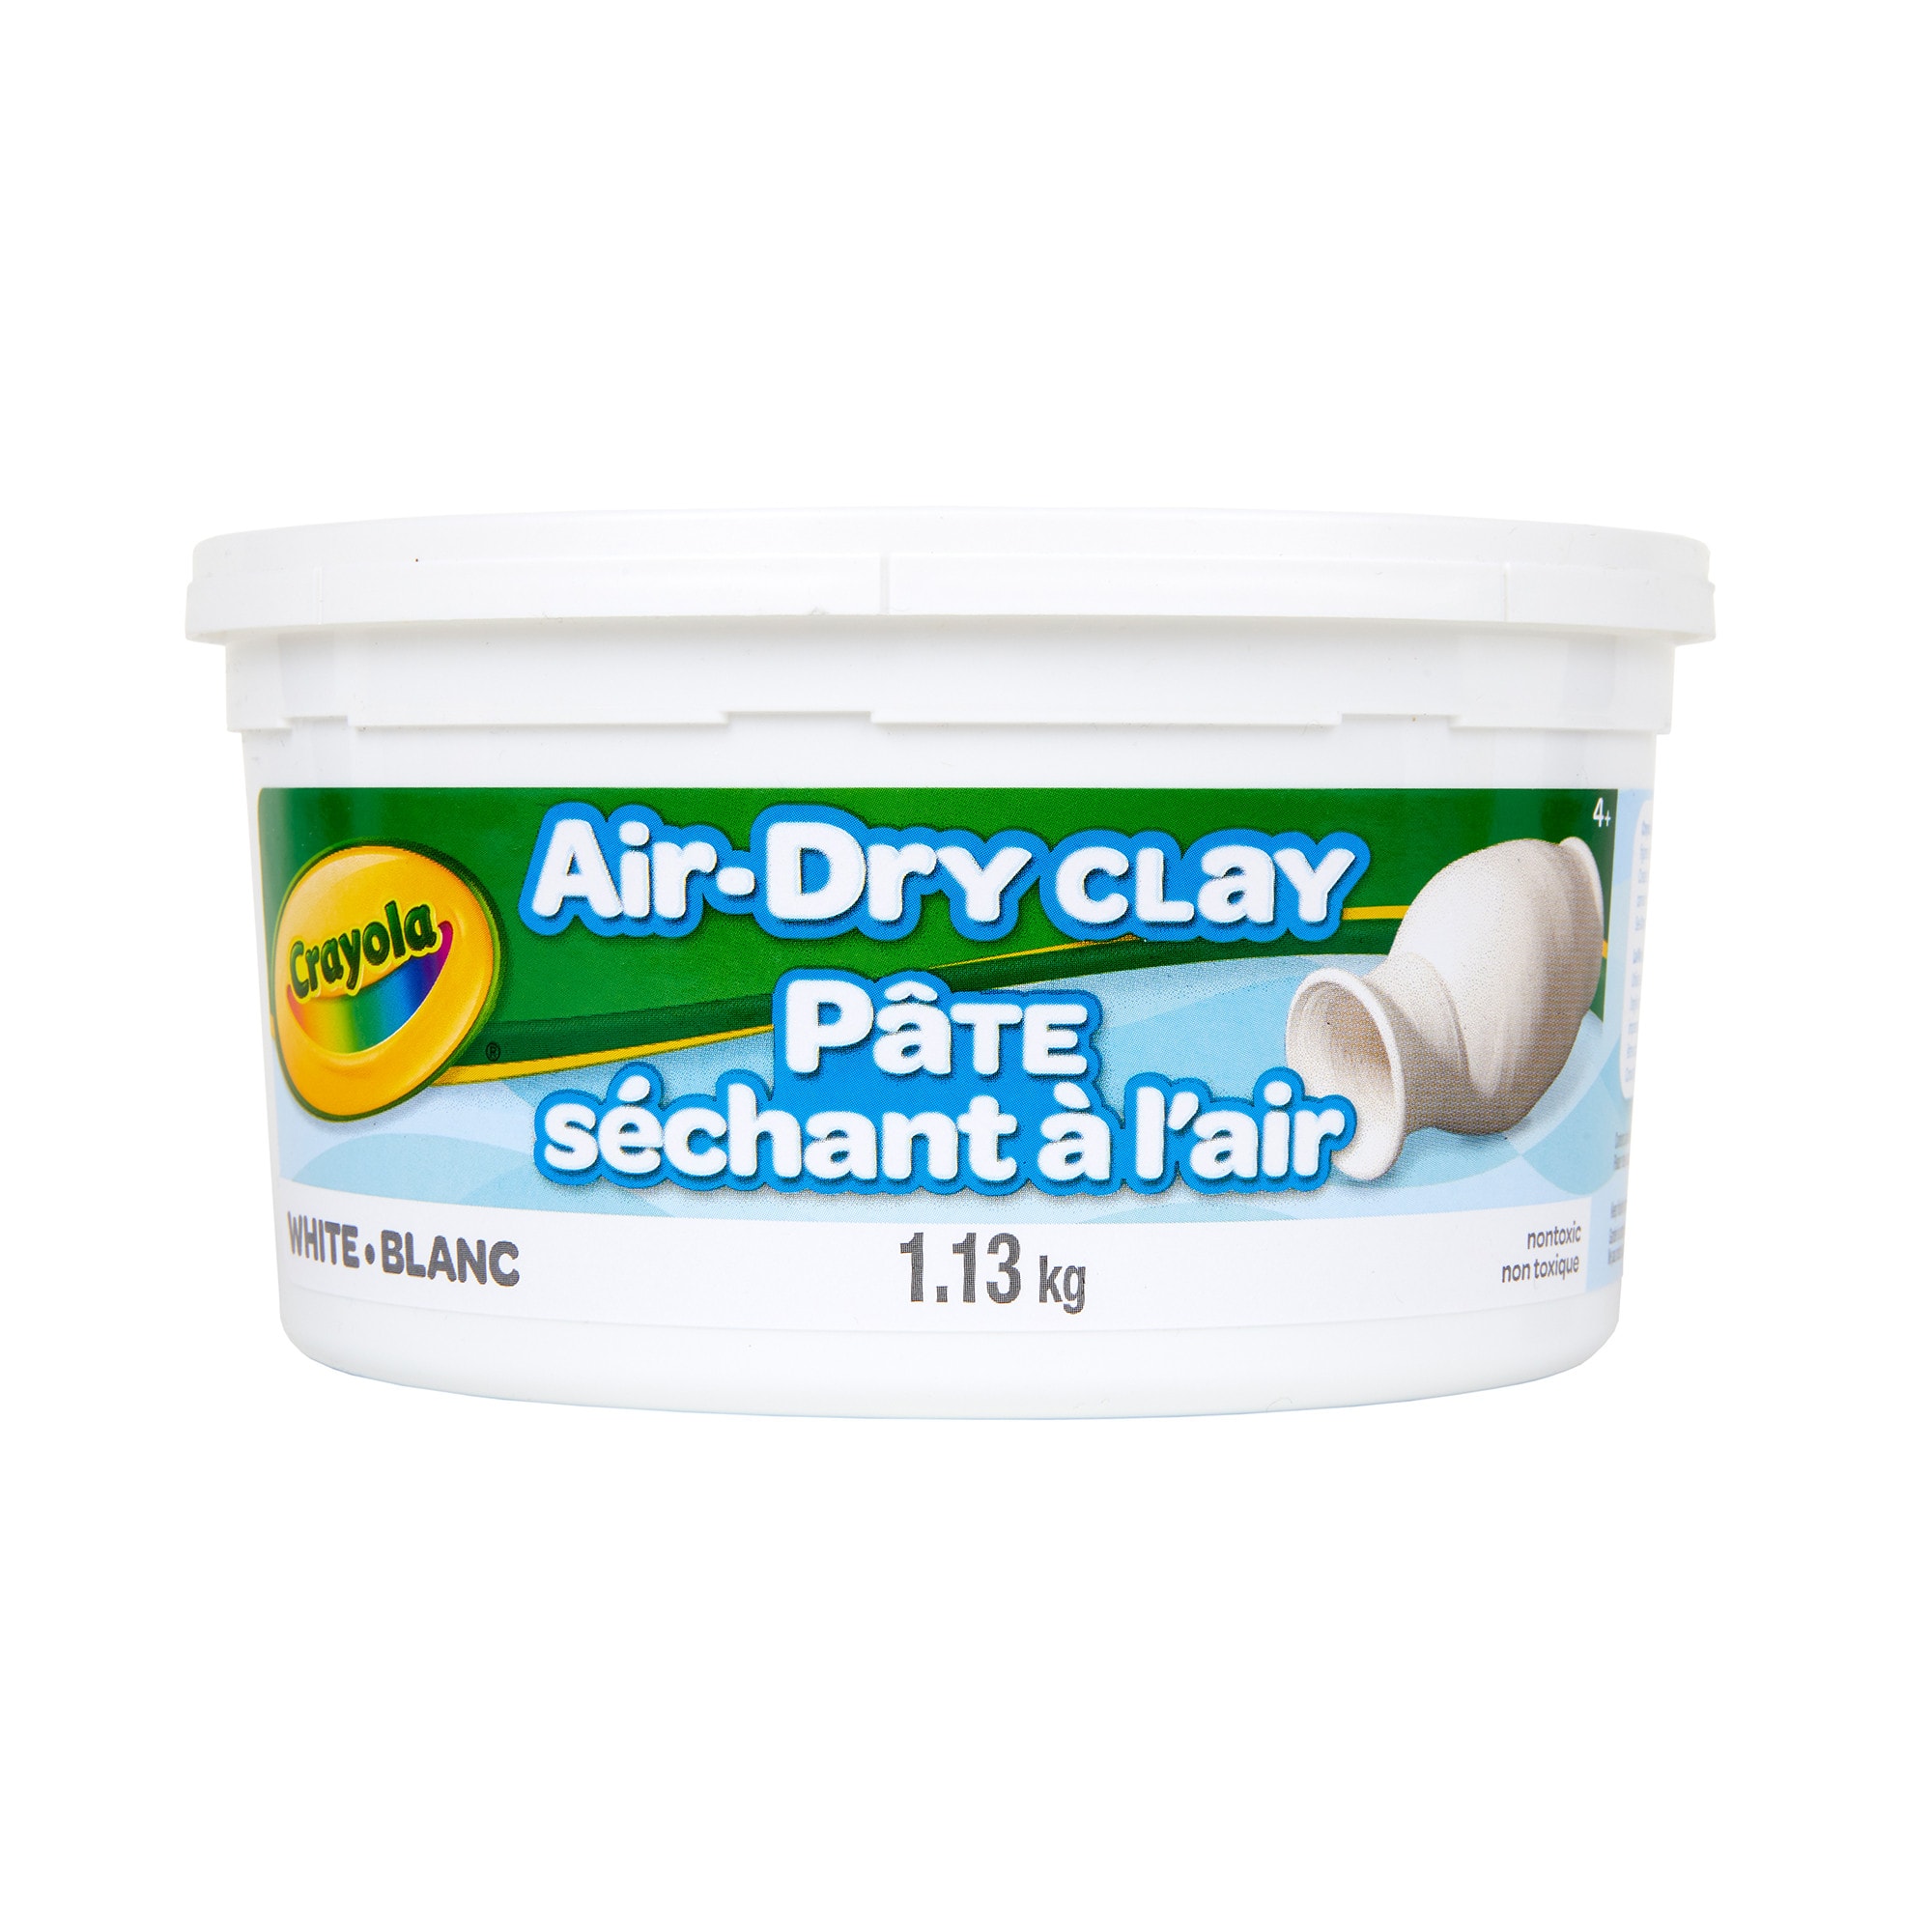 The Teachers' Lounge®  Air-Dry Clay, 2.5 Pounds Resealable Bucket, White